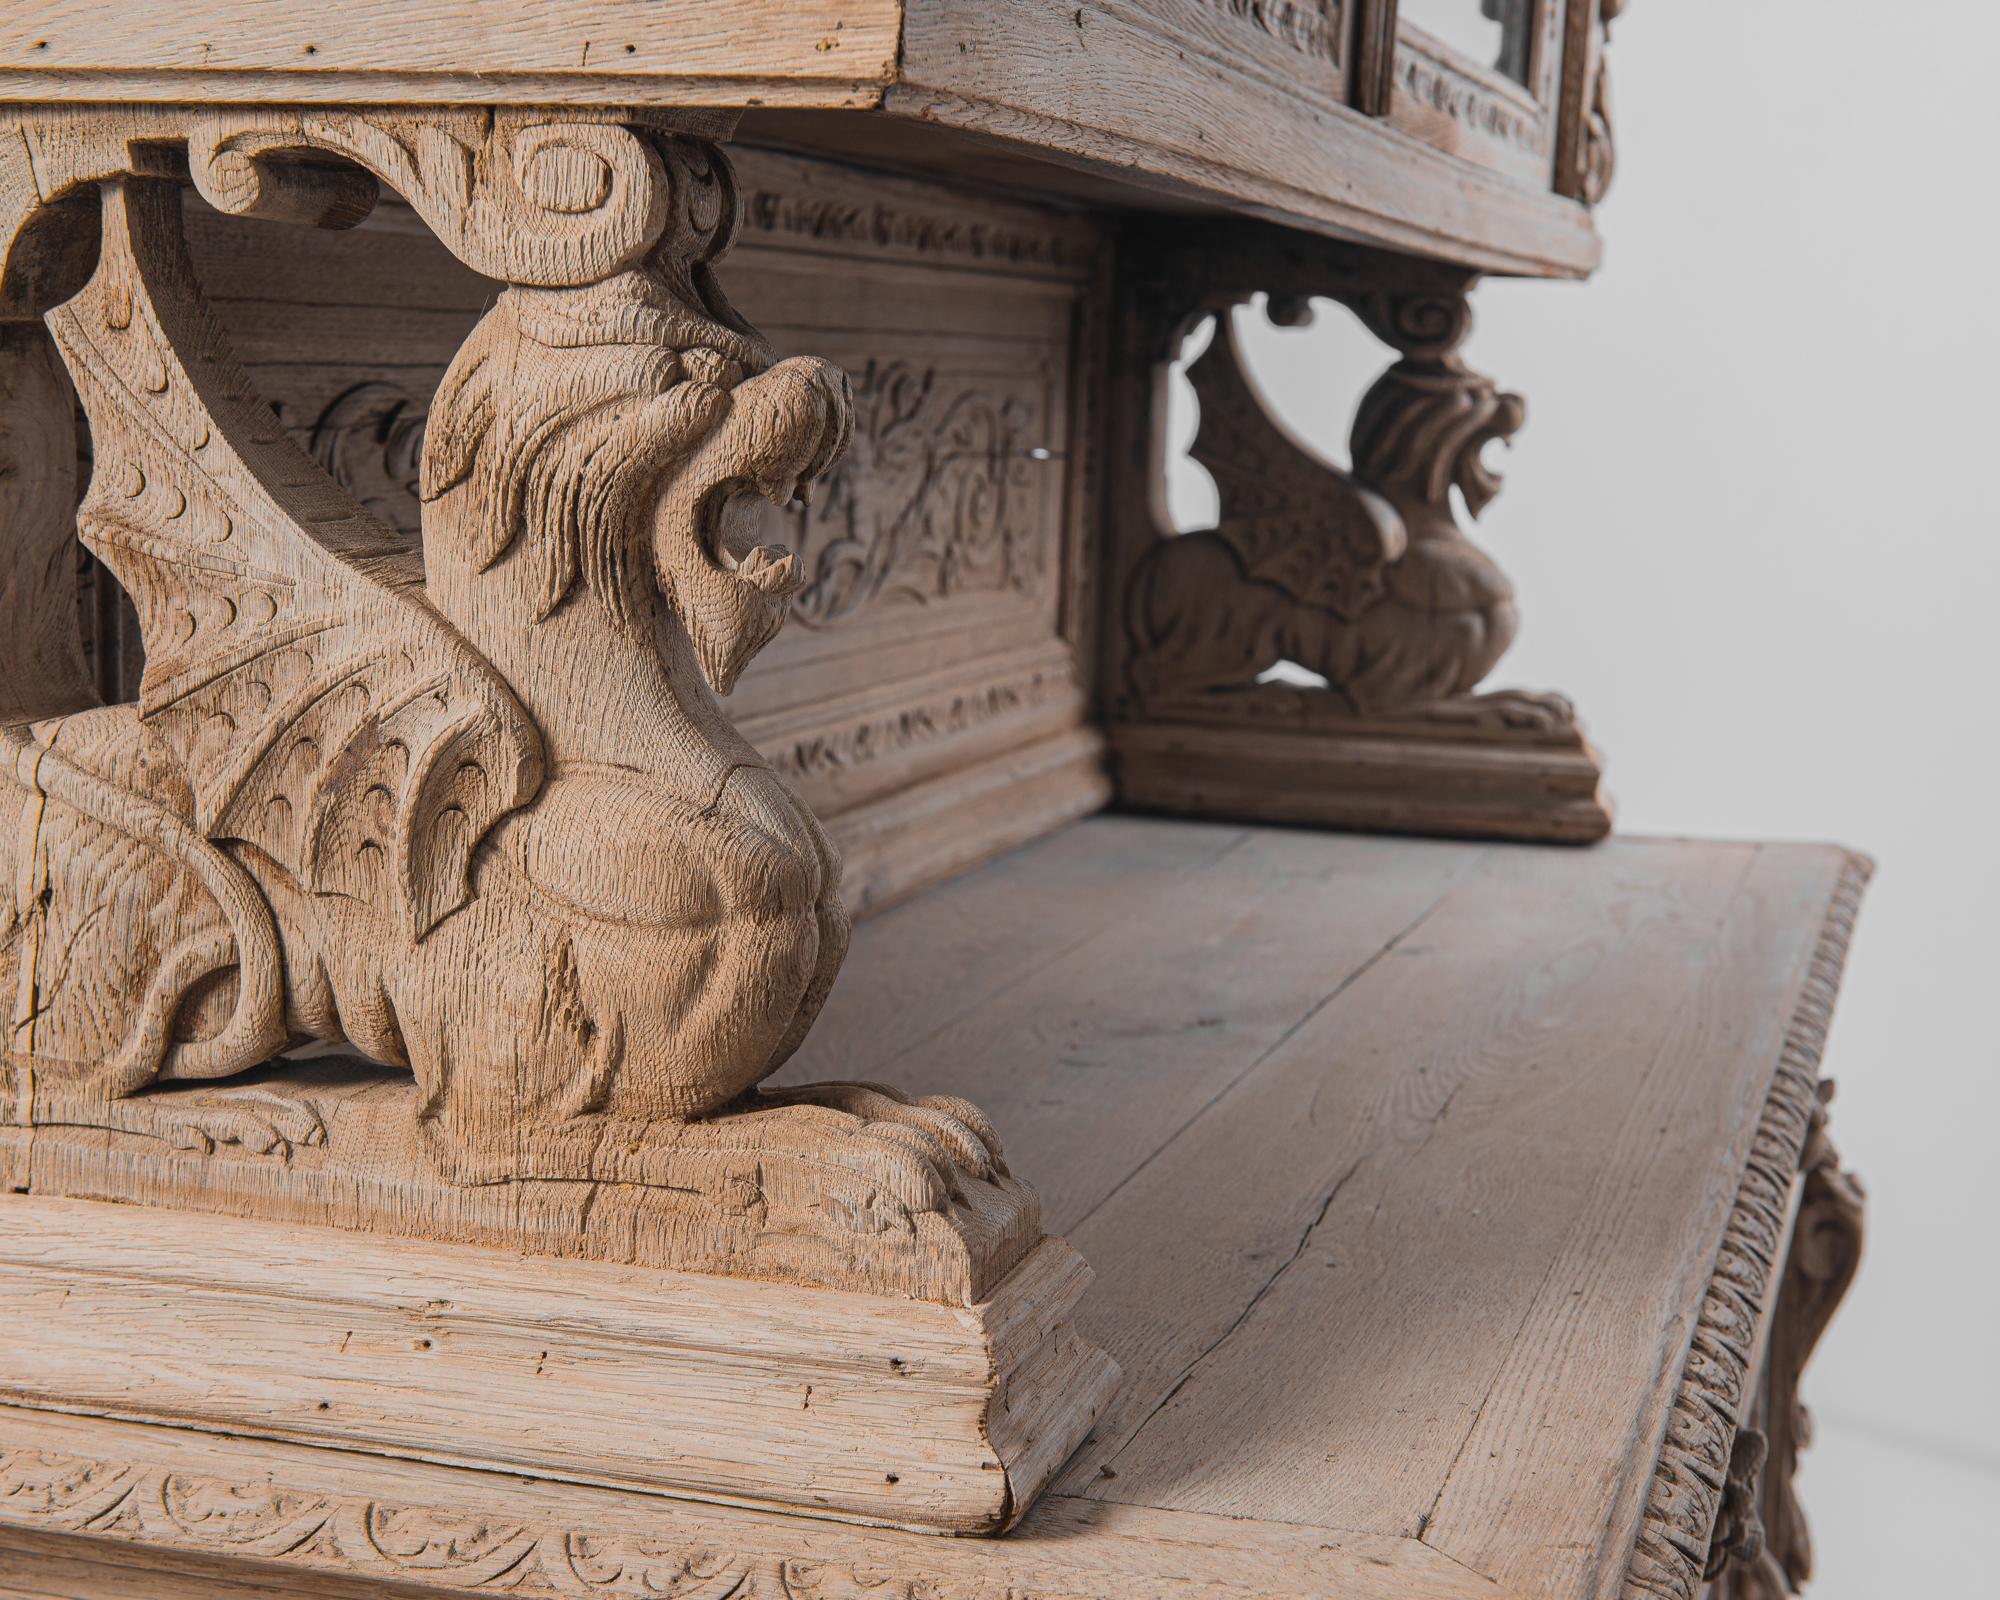 Lavish carving gives this 1880s French vitrine a verdant Renaissance feel. Scrolling leaves, and vines, fruit and flowers, carved in exquisite detail, cover every surface of the case. Carved dragons set on top of the lower cabinet support the